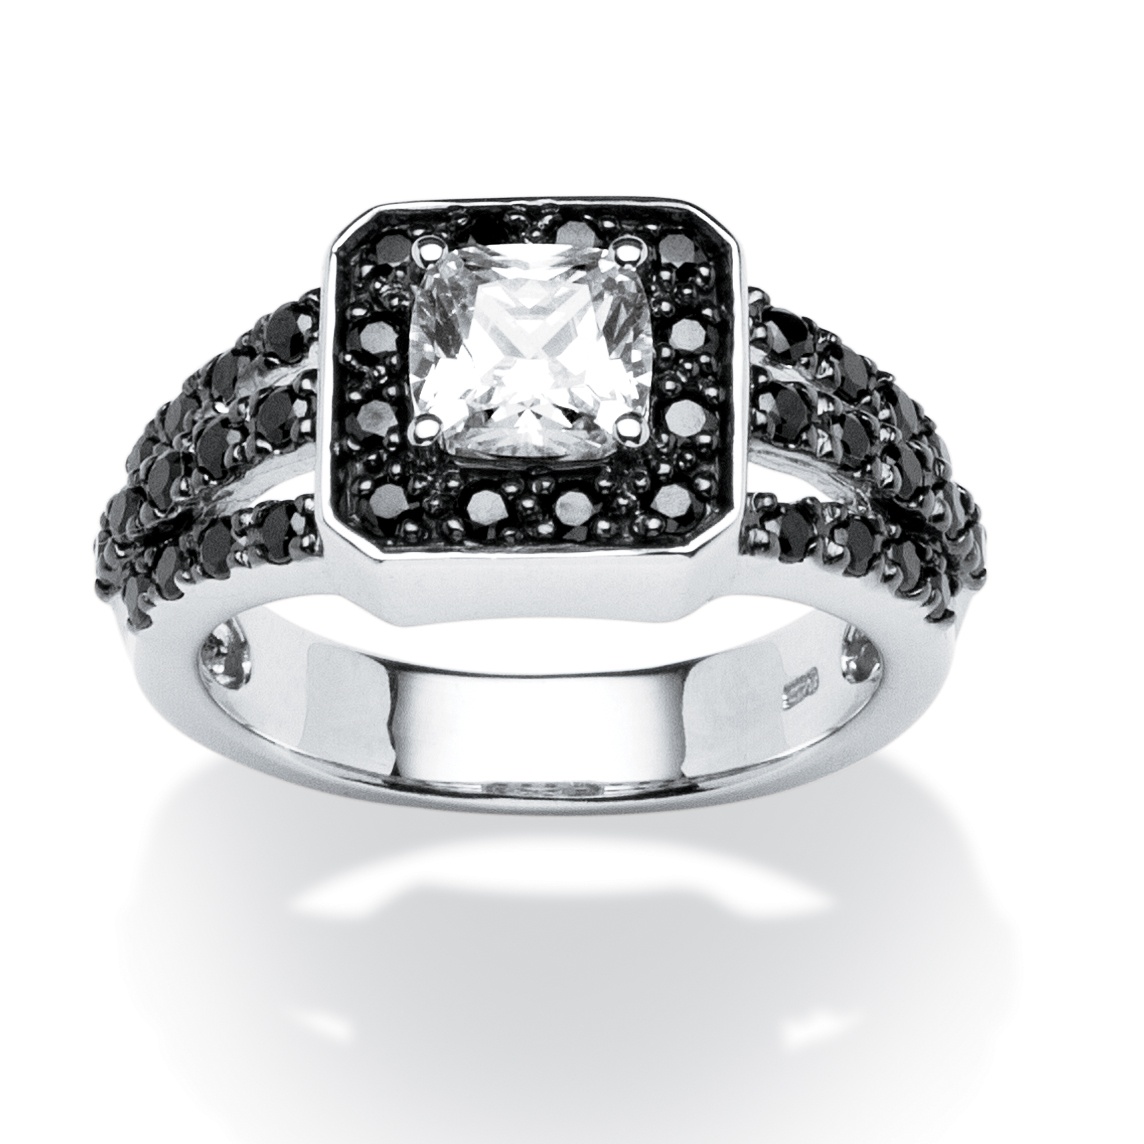 1.72 TCW Black and White Cubic Zirconia Ring in Platinum over Sterling ...